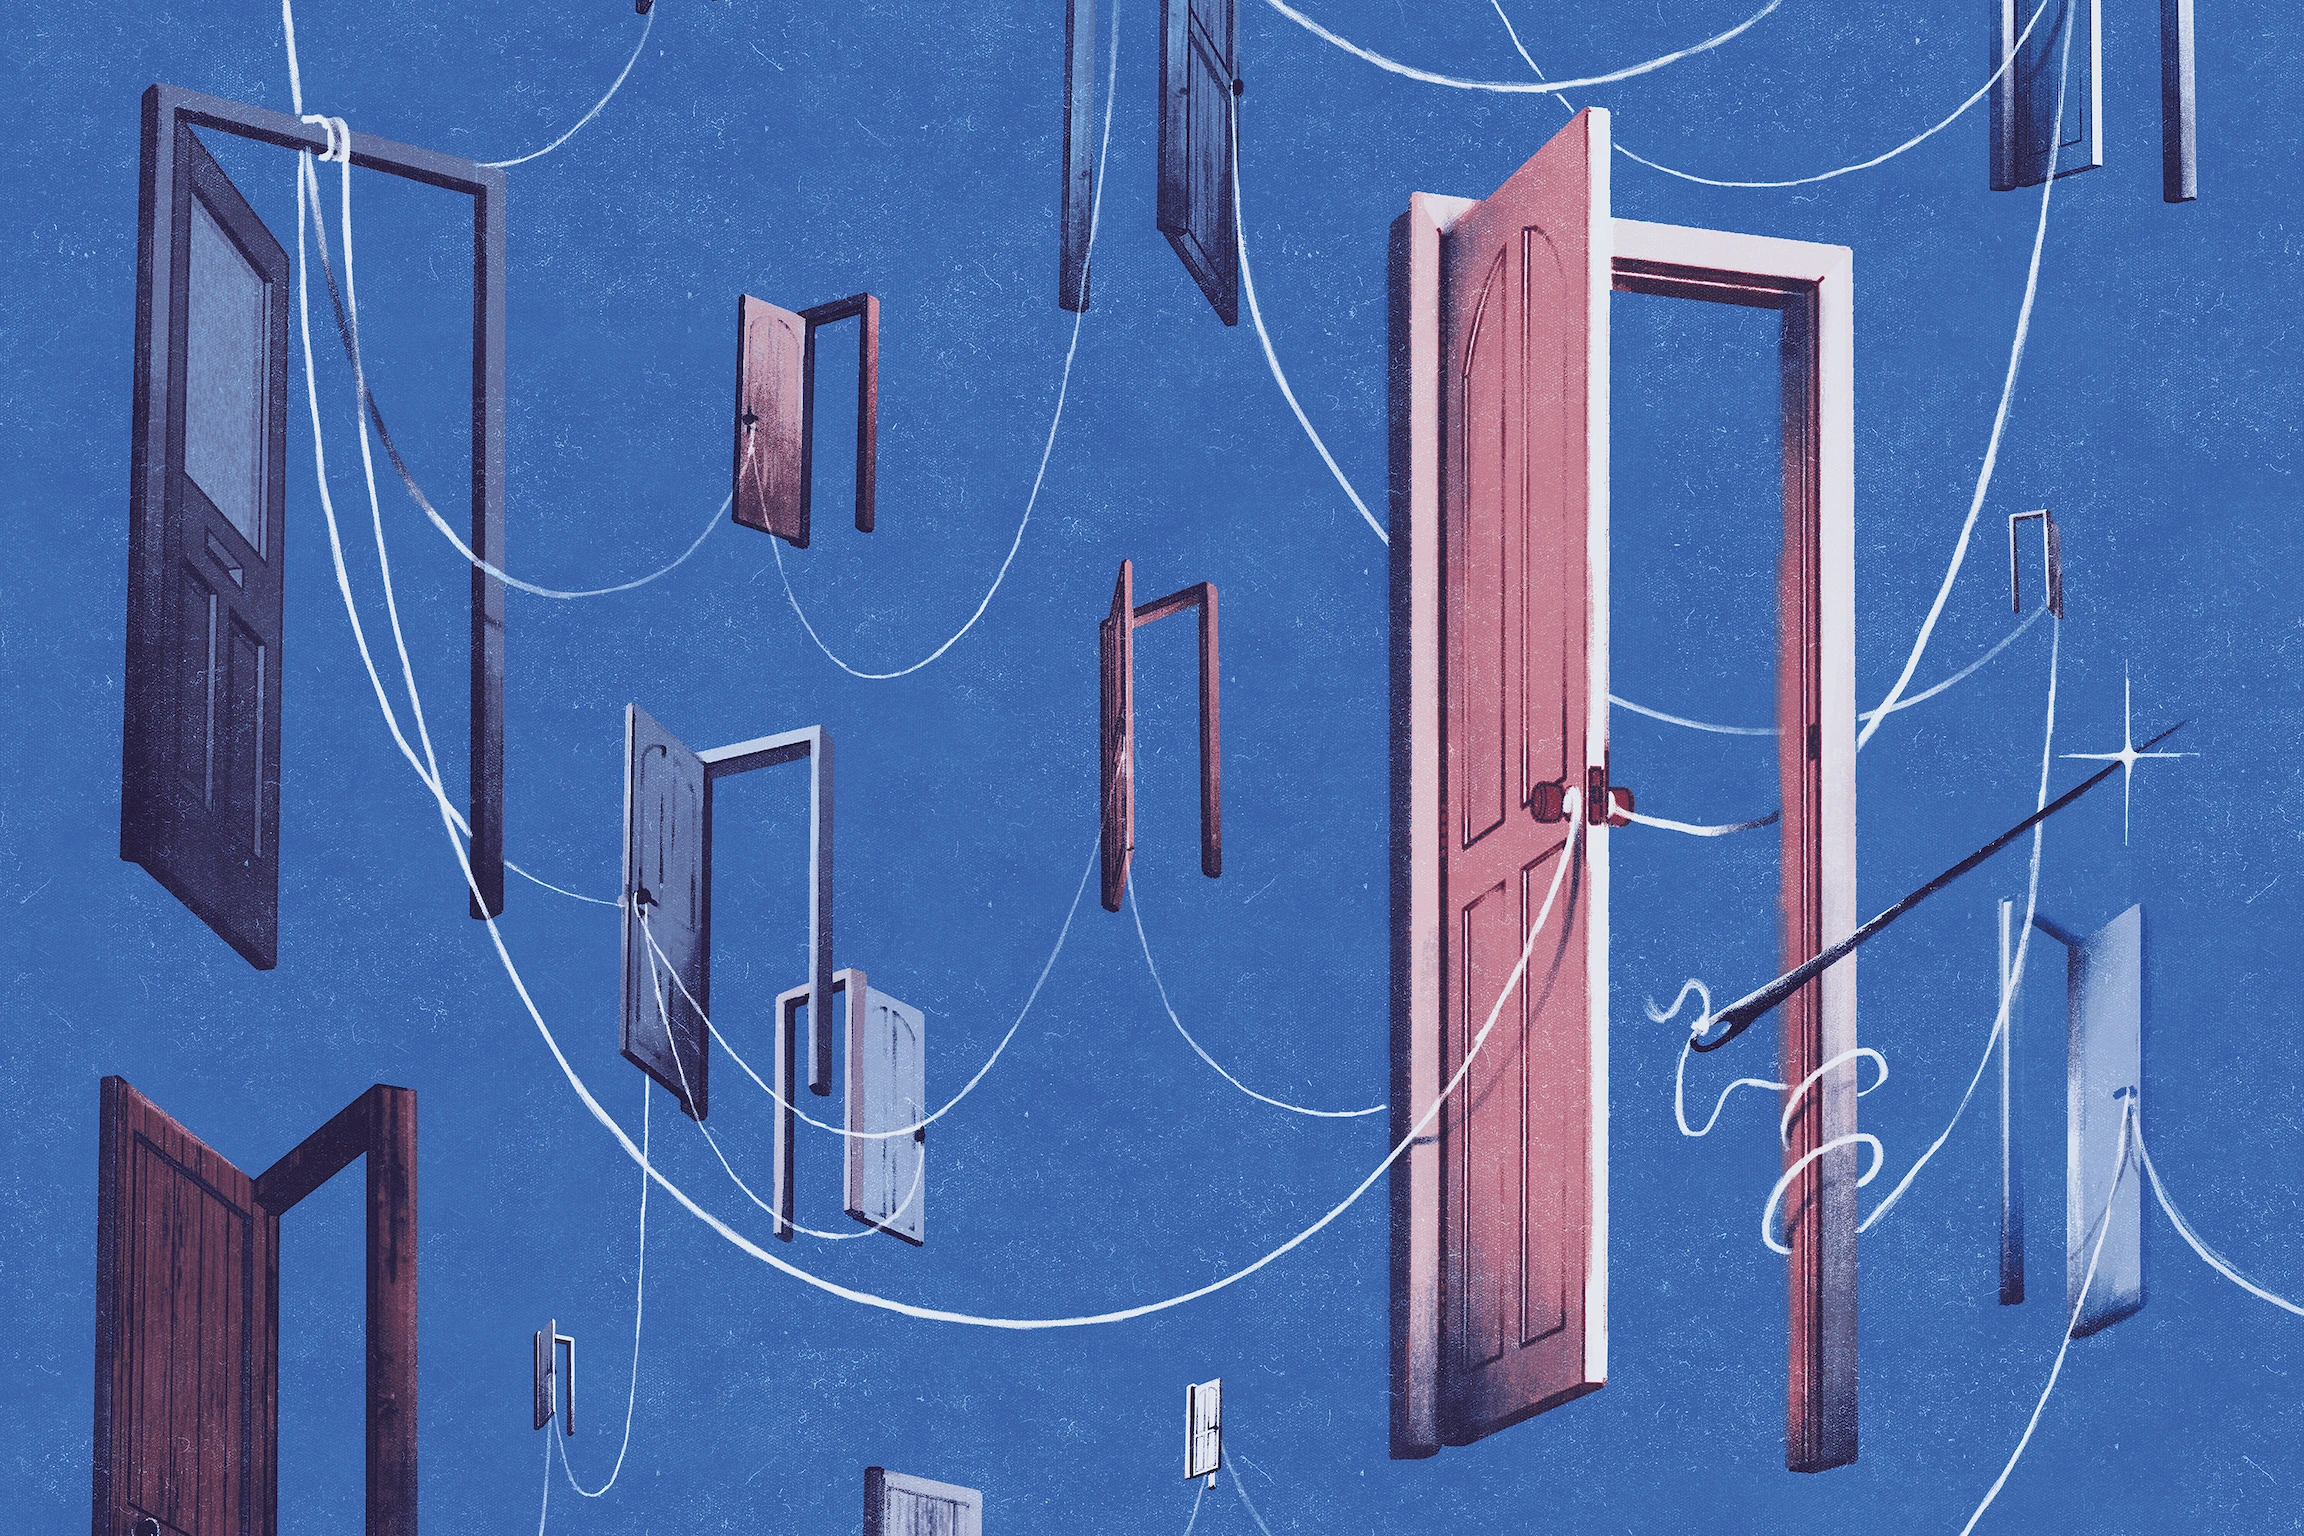 An abstract image of a series of 18 door frames with open doors float. A line evoking a string connects then doors, and is tied on door knobs, wrapped around door frames, and other features.